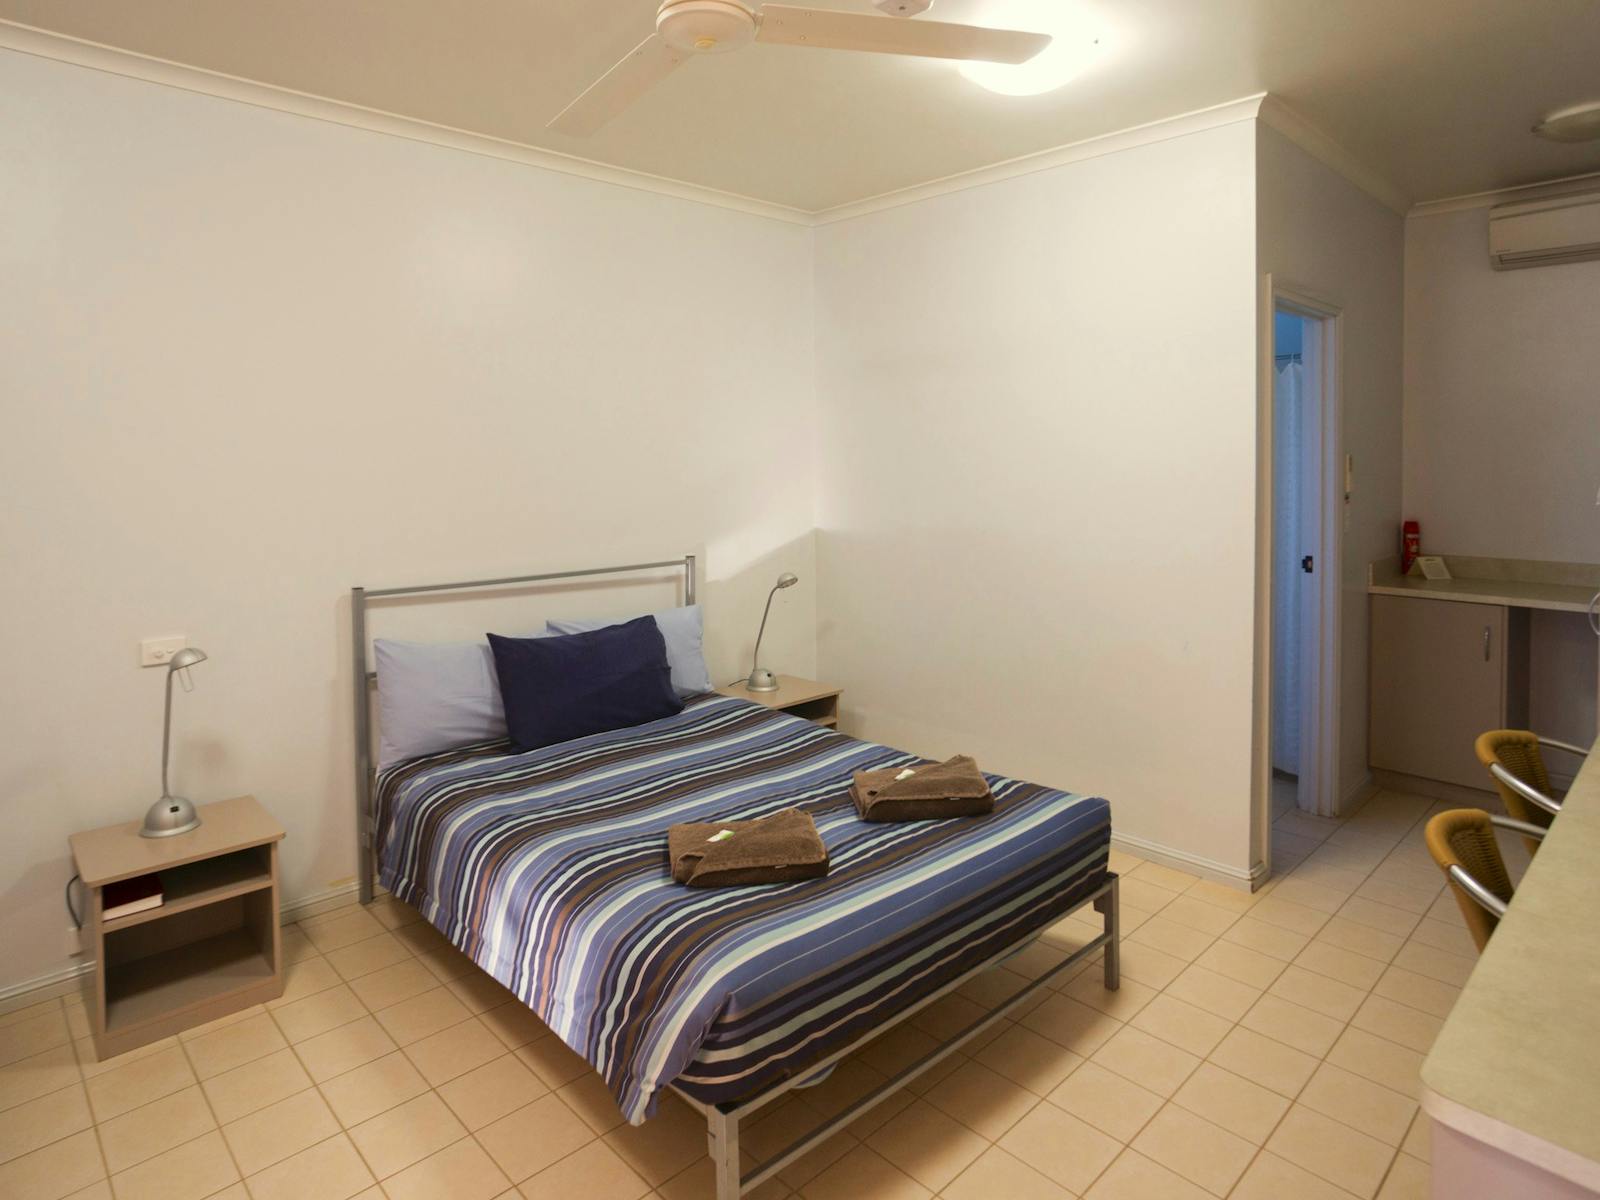 Motel-style room with bed, bedside table at Birdsville Hotel